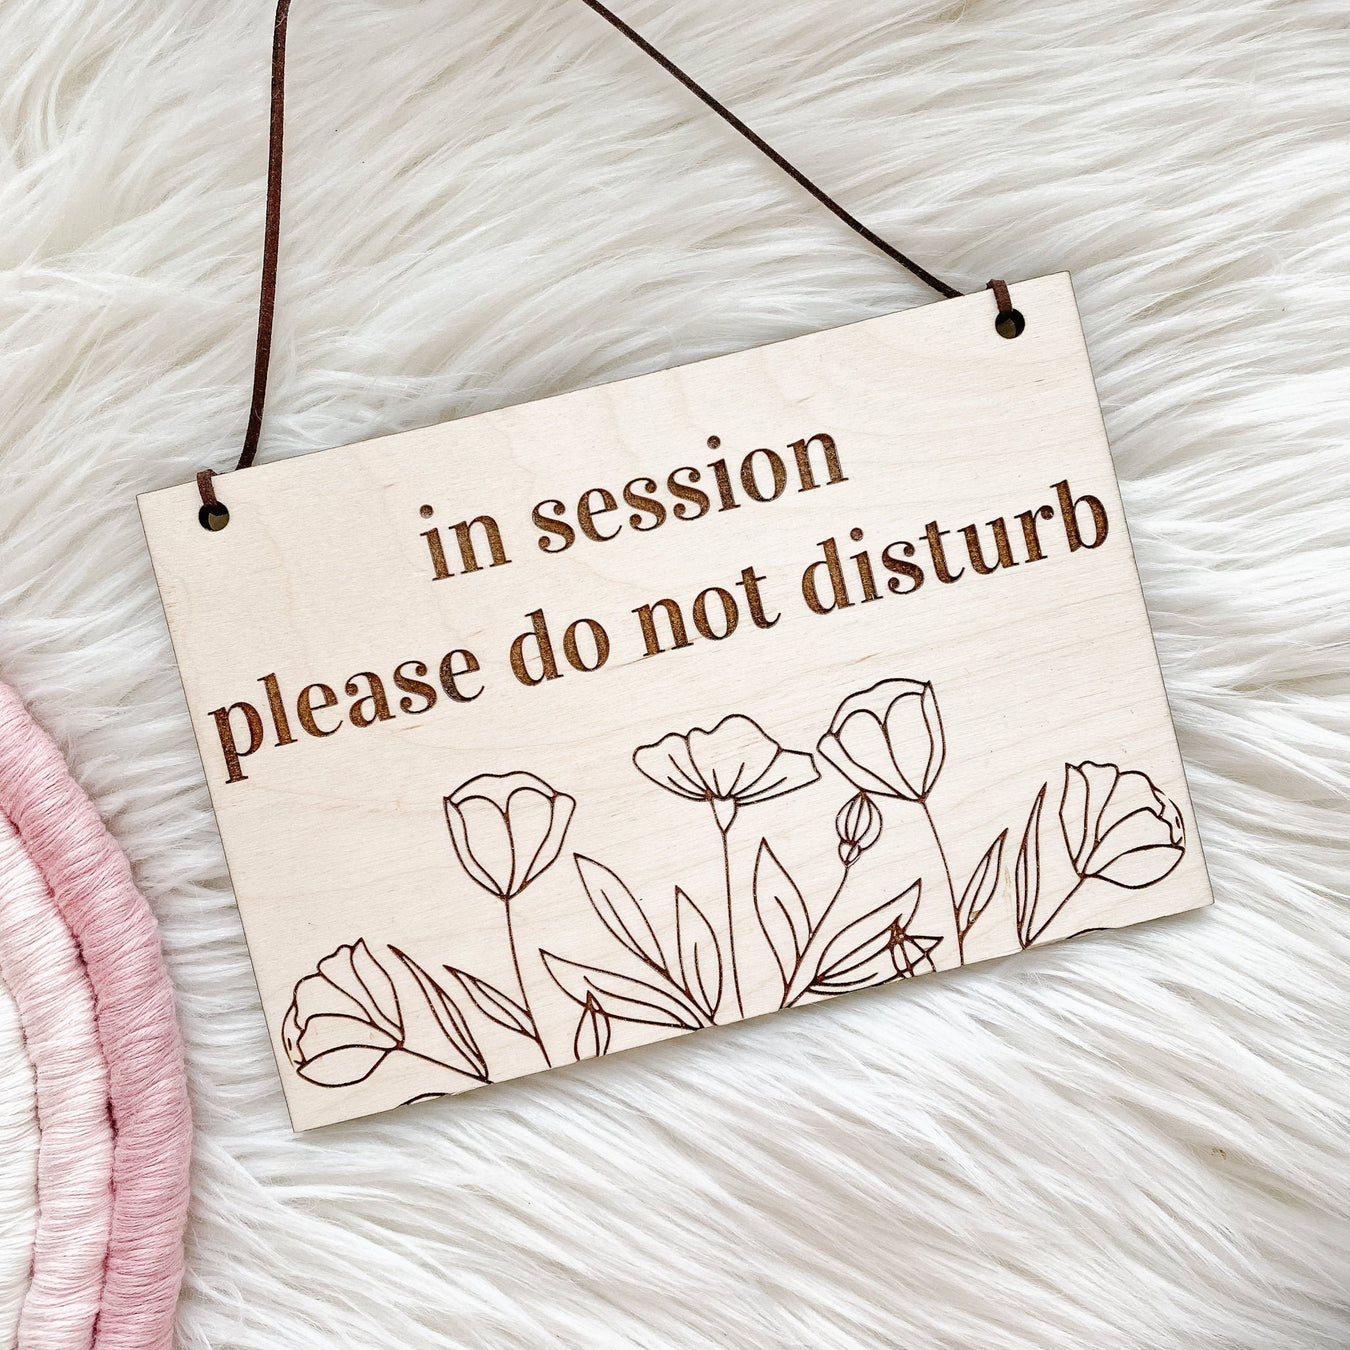 Please Do Not Disturb Signs for Offices